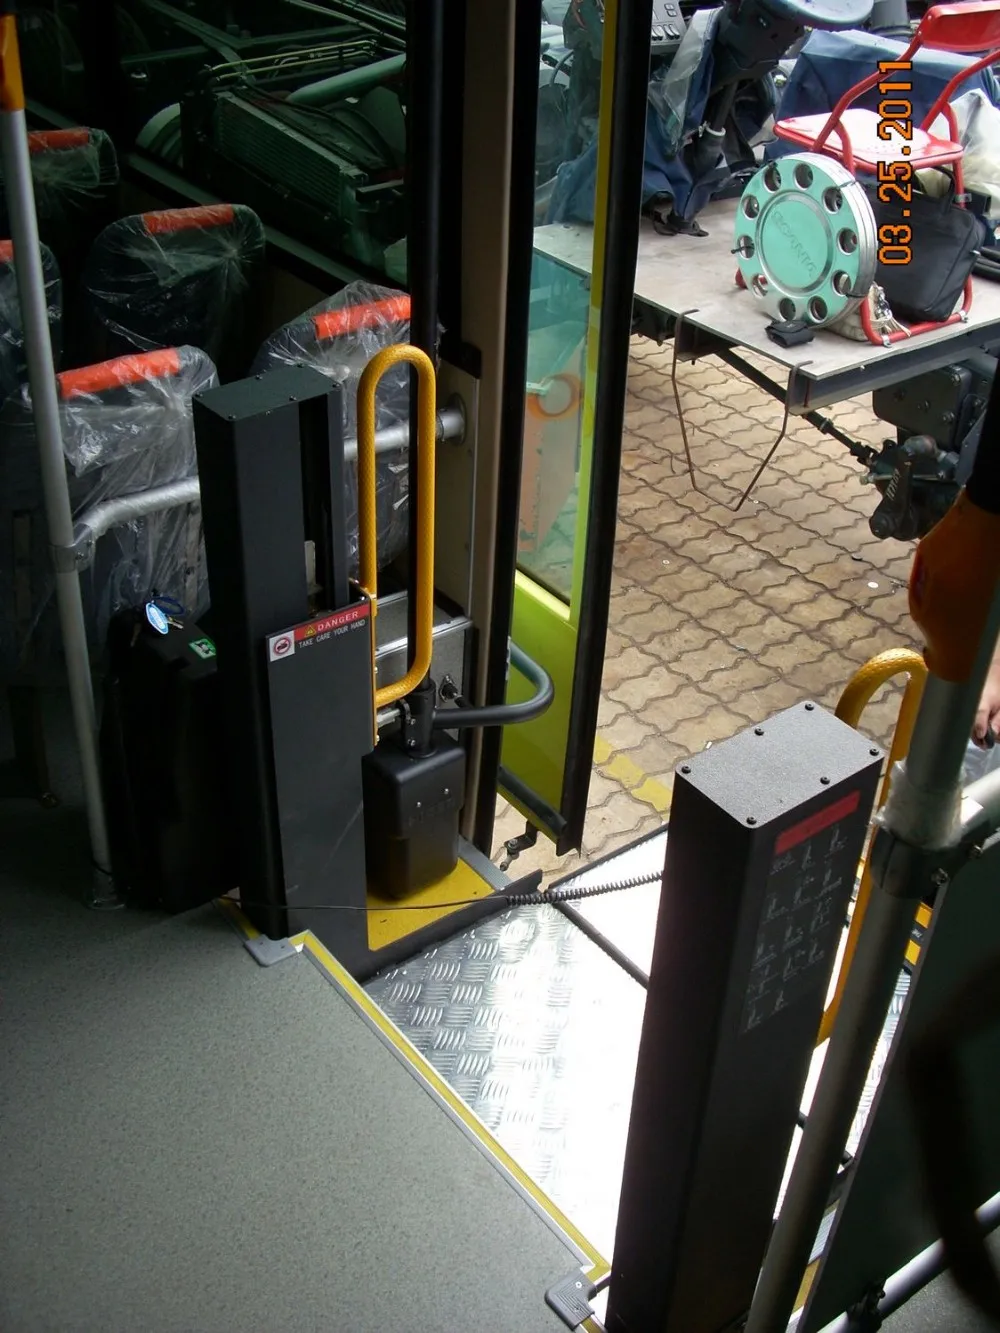 Wl-step Series Wheelchair Lift For Bus - Buy Wheelchair Lifts,Bus Lifts